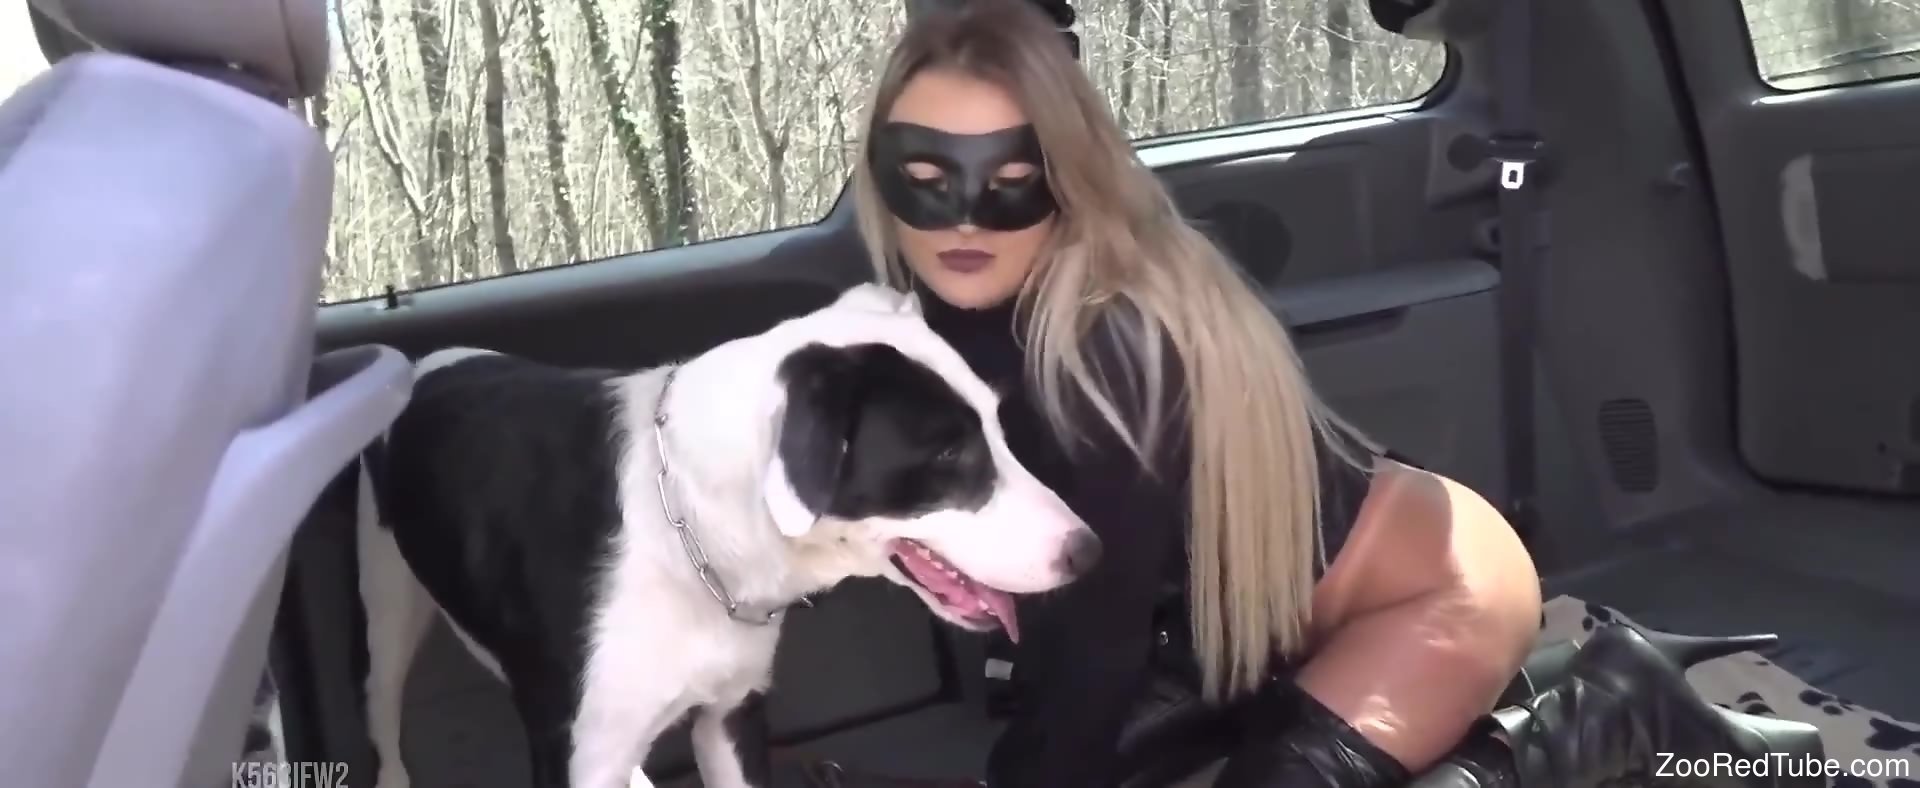 1920px x 788px - Fine woman with sexy ass, doggy porn with a real dog in the car